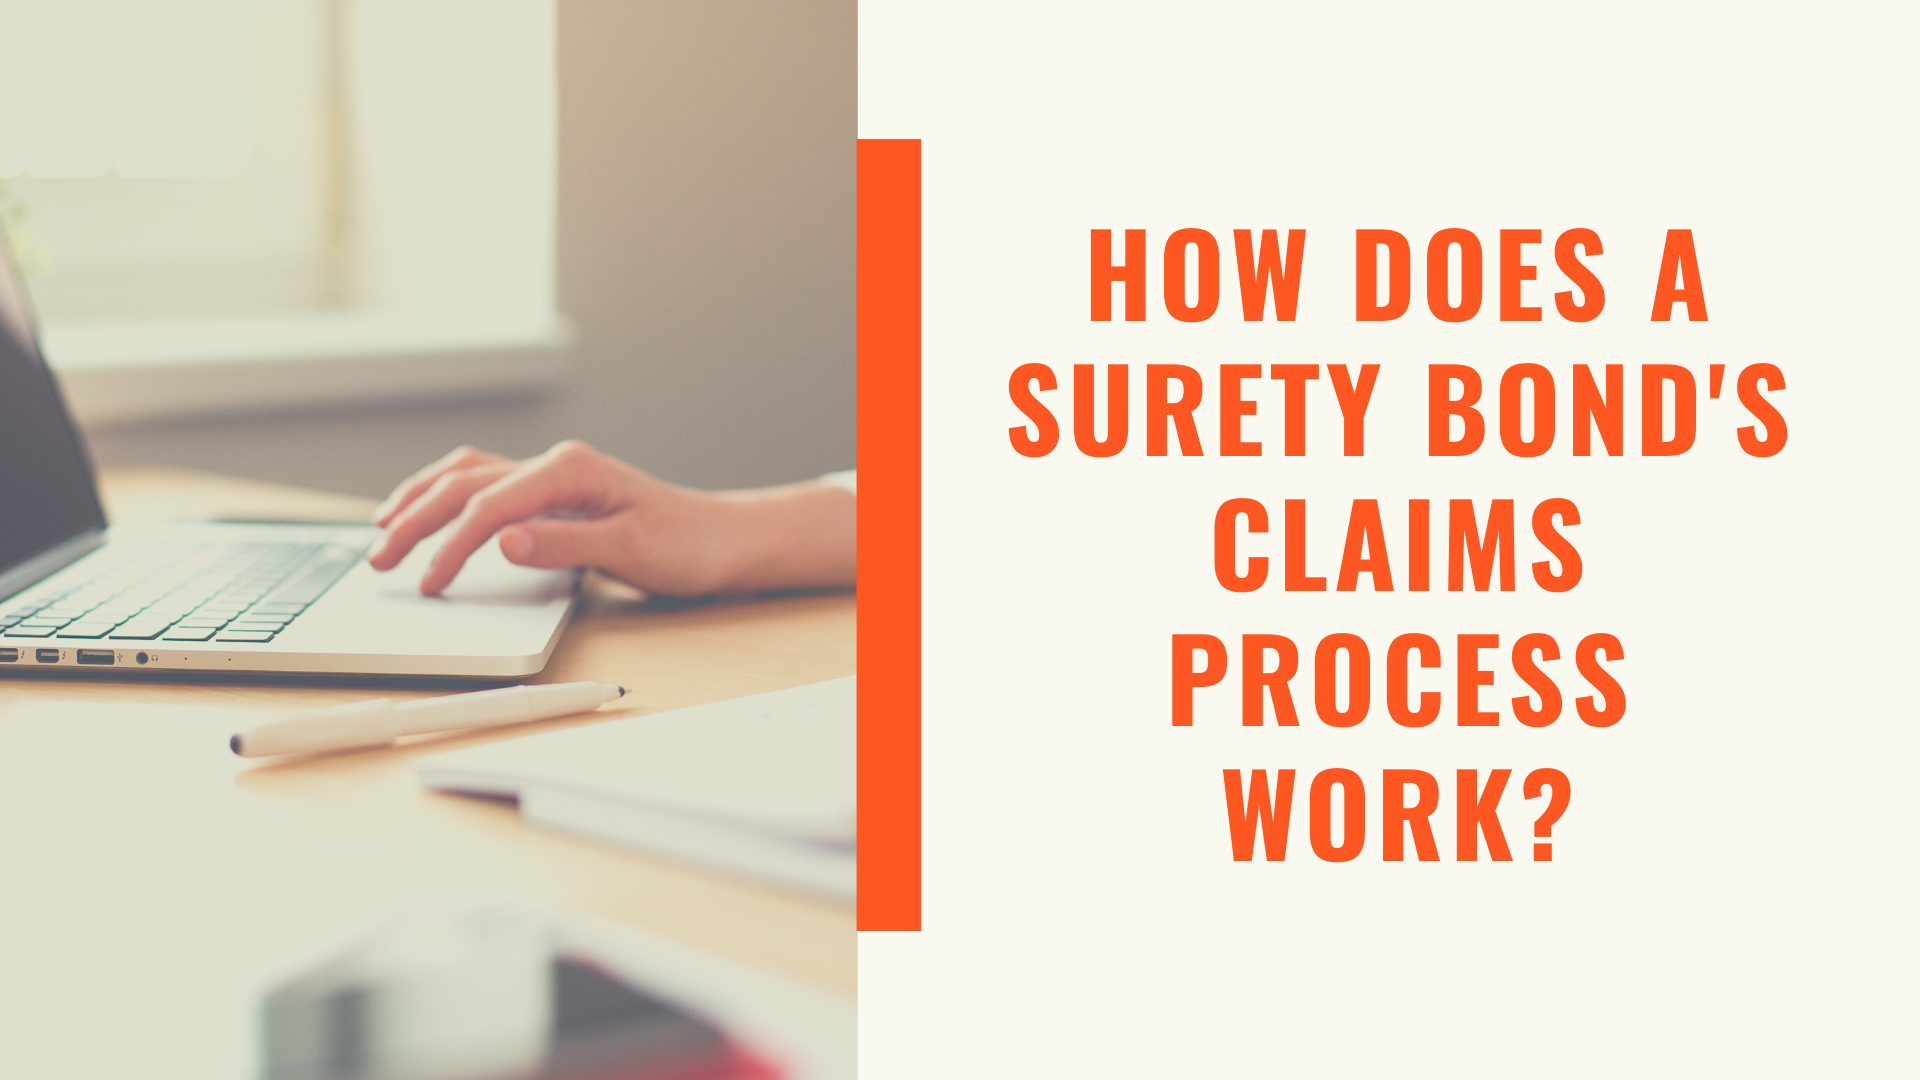 surety bond - What are some of the most common reasons for filing a Surety Bond claim - working